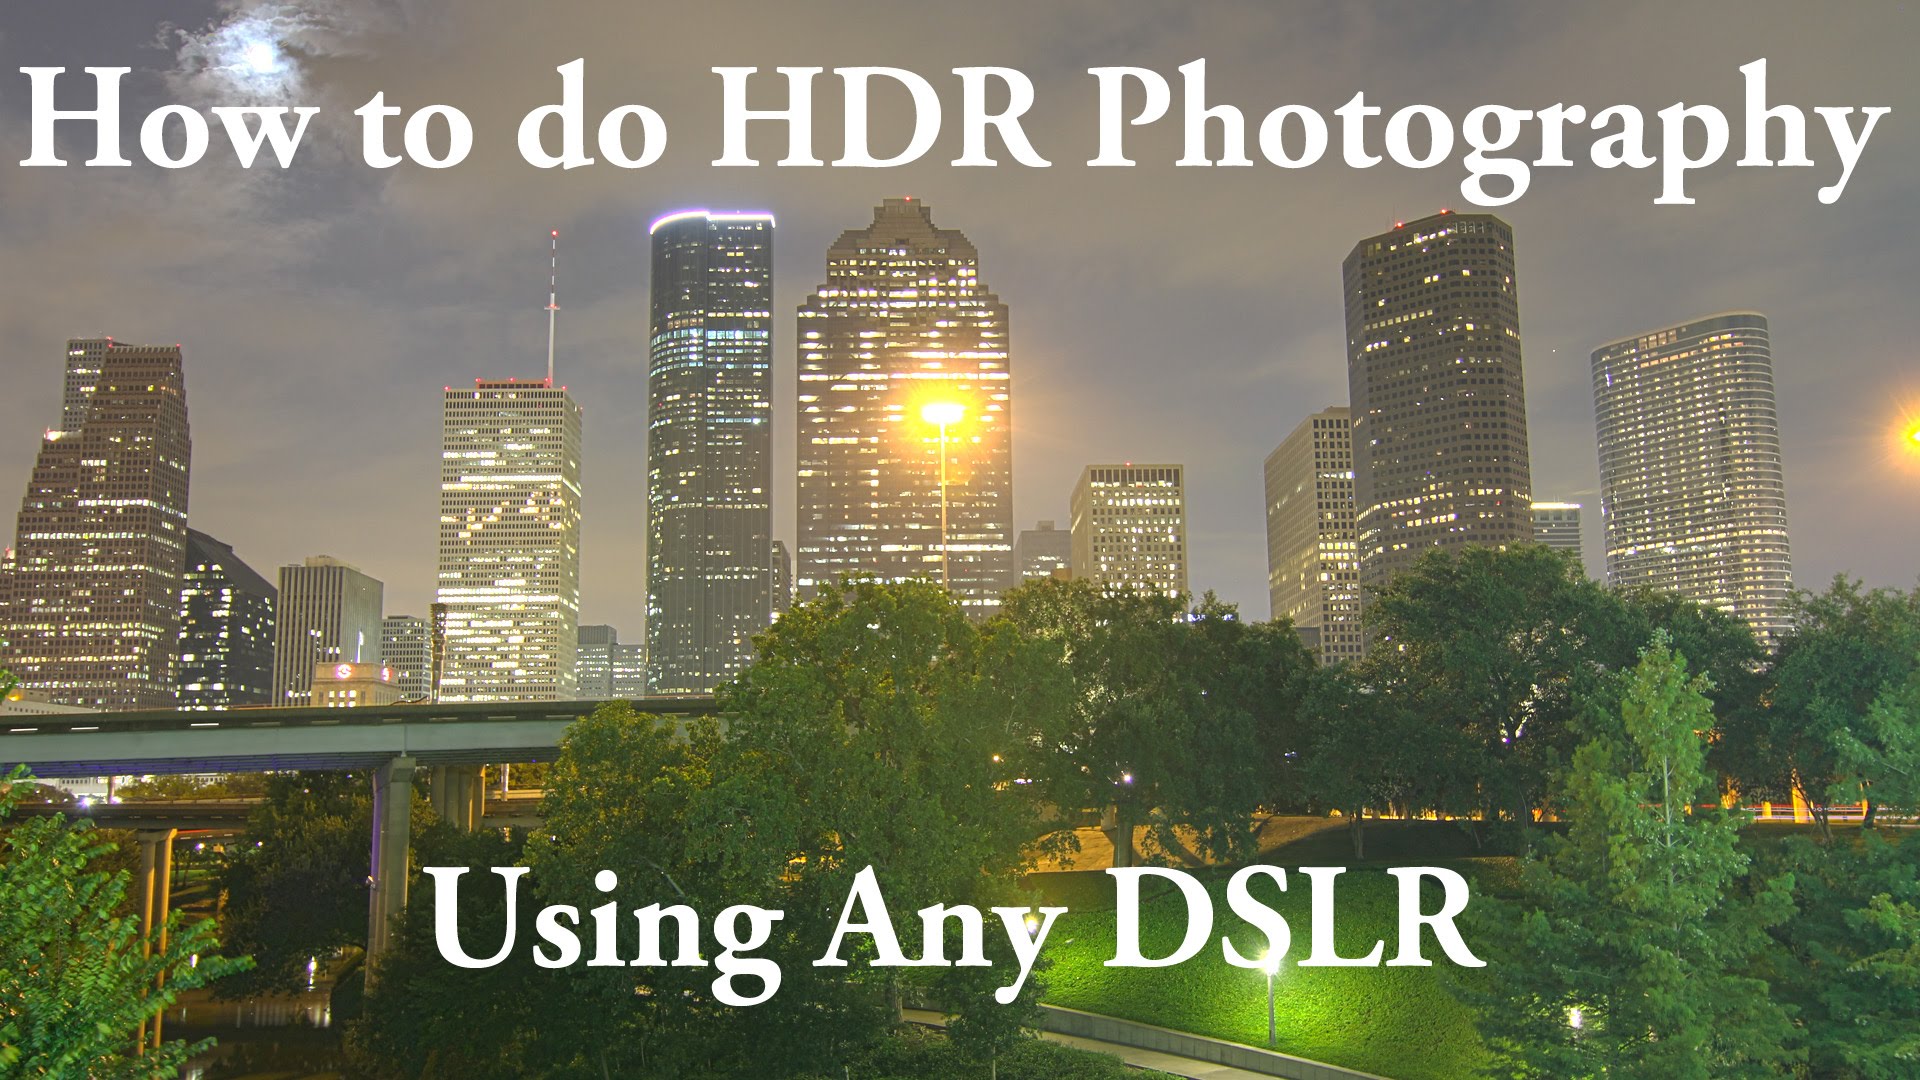 HDR Photography – #aehdr – How to High Dynamic Range Photography on ANY DSLR Camera